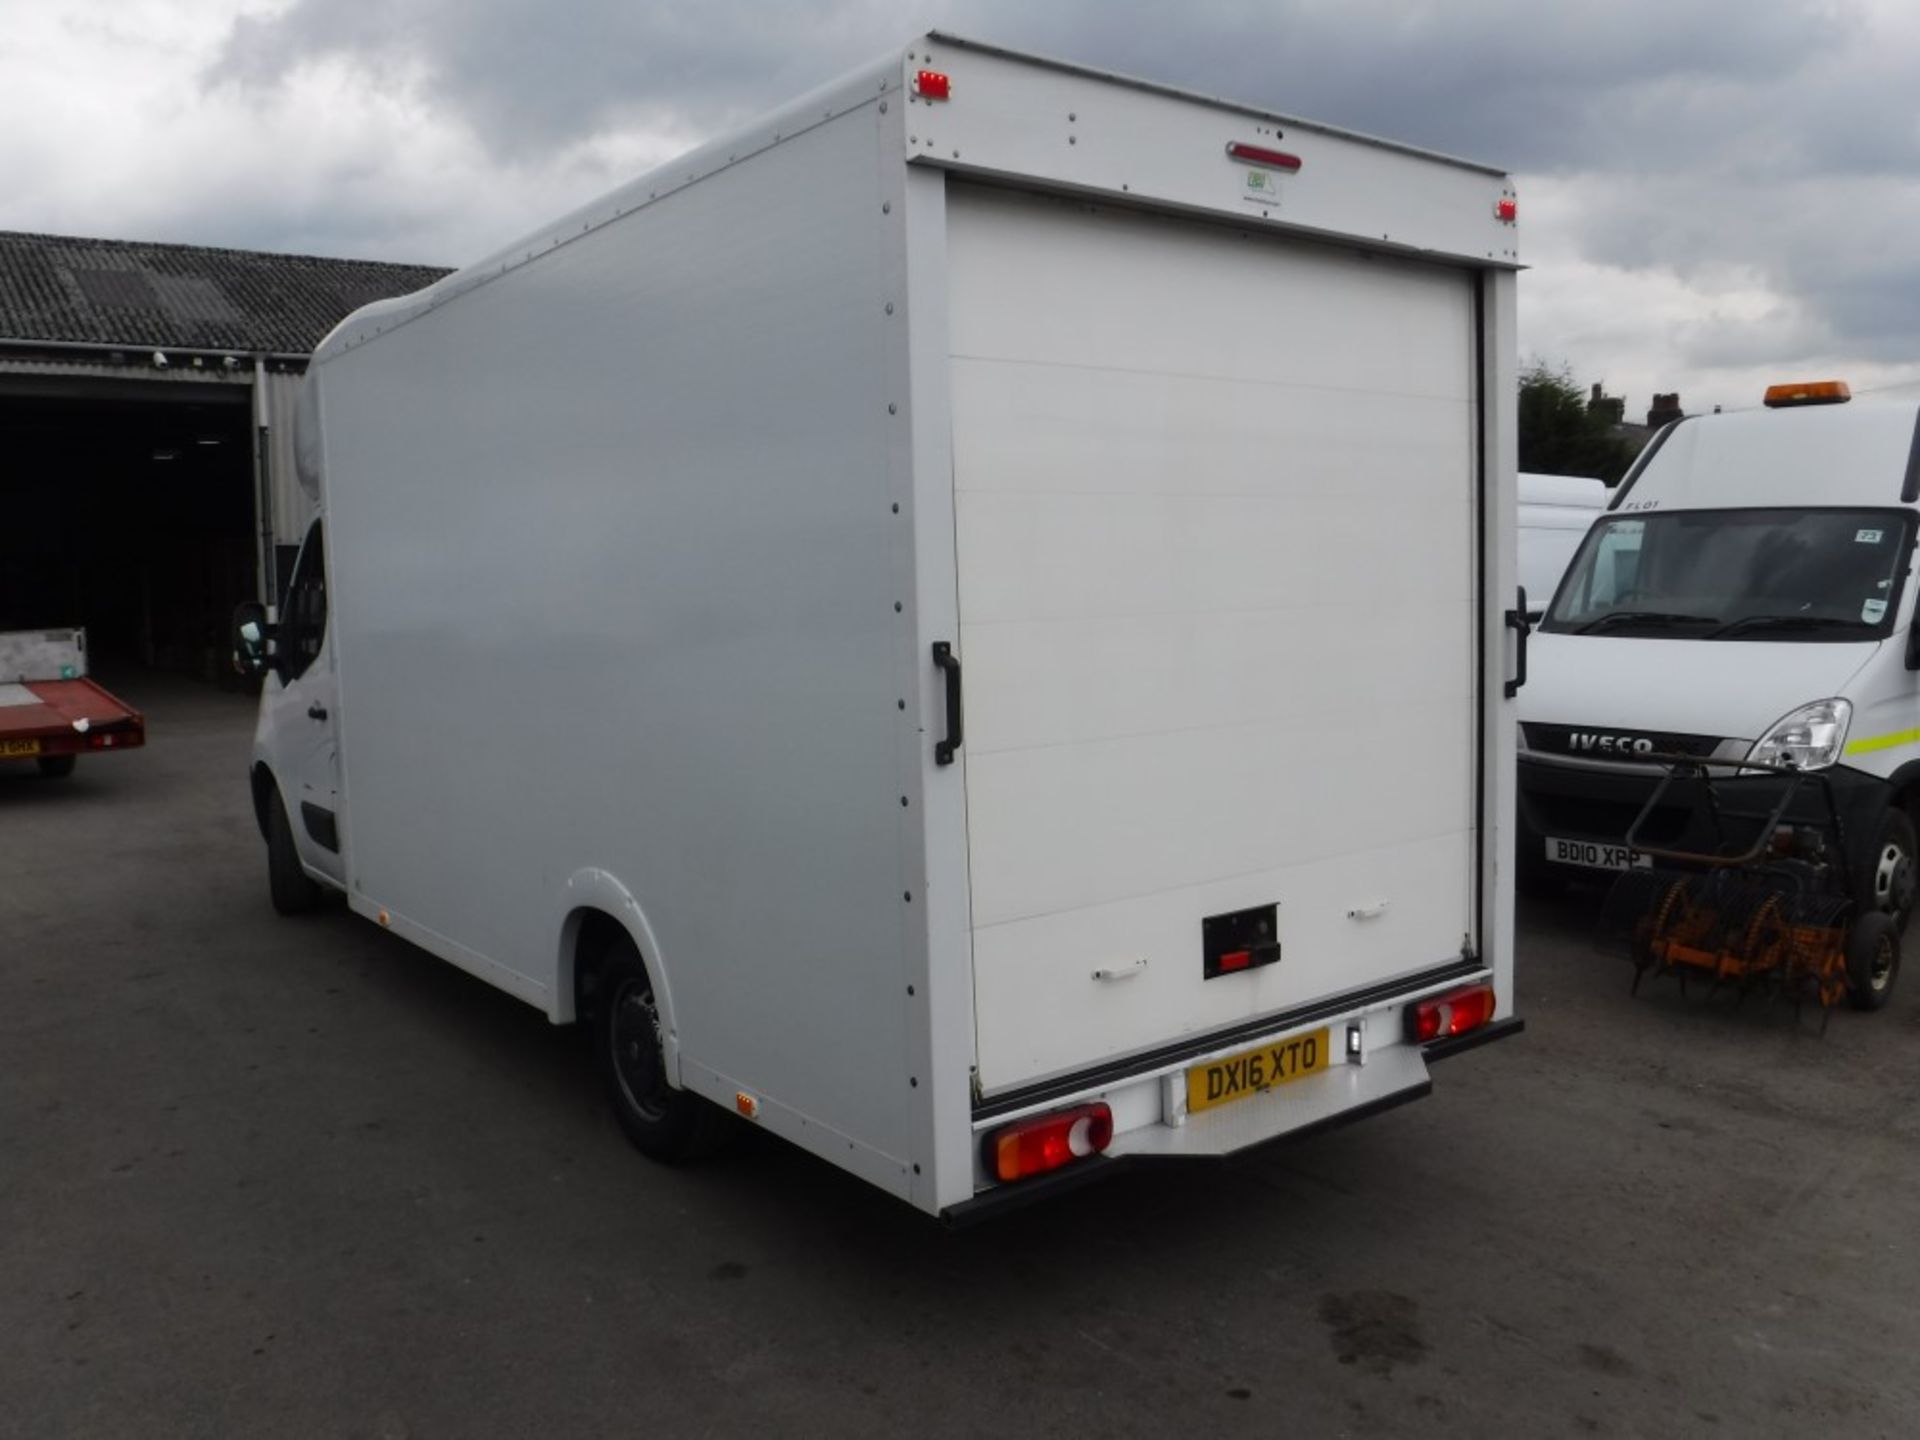 16 reg VAUXHALL MOVANO F3500 CDTI BOX VAN, 1ST REG 03/16, 135858M WARRANTED, V5 HERE, 1 OWNER FROM - Image 3 of 5